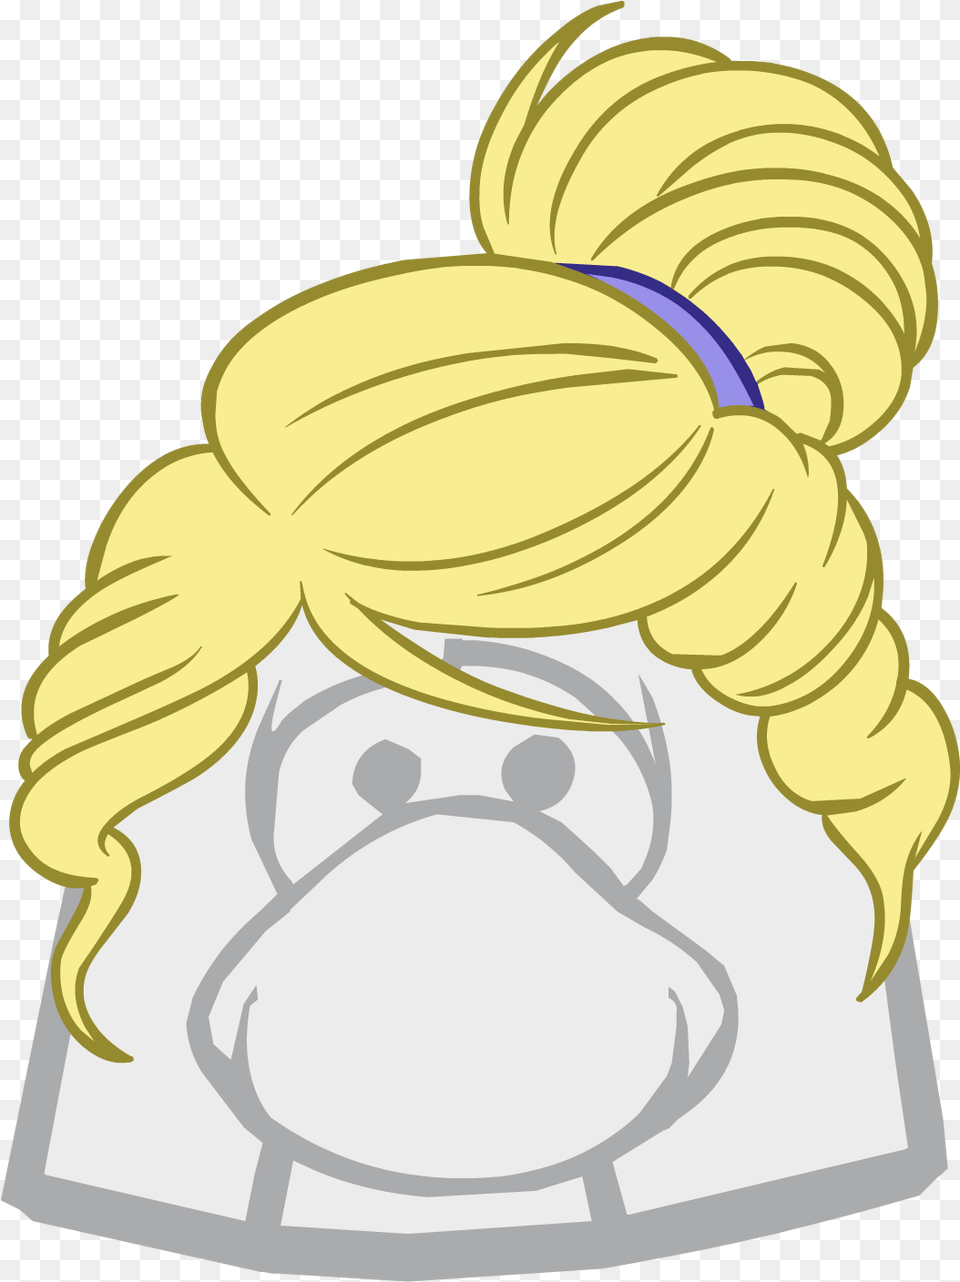 Icon Club Penguin Ponytail, Hair, Person, Smoke Pipe Free Png Download